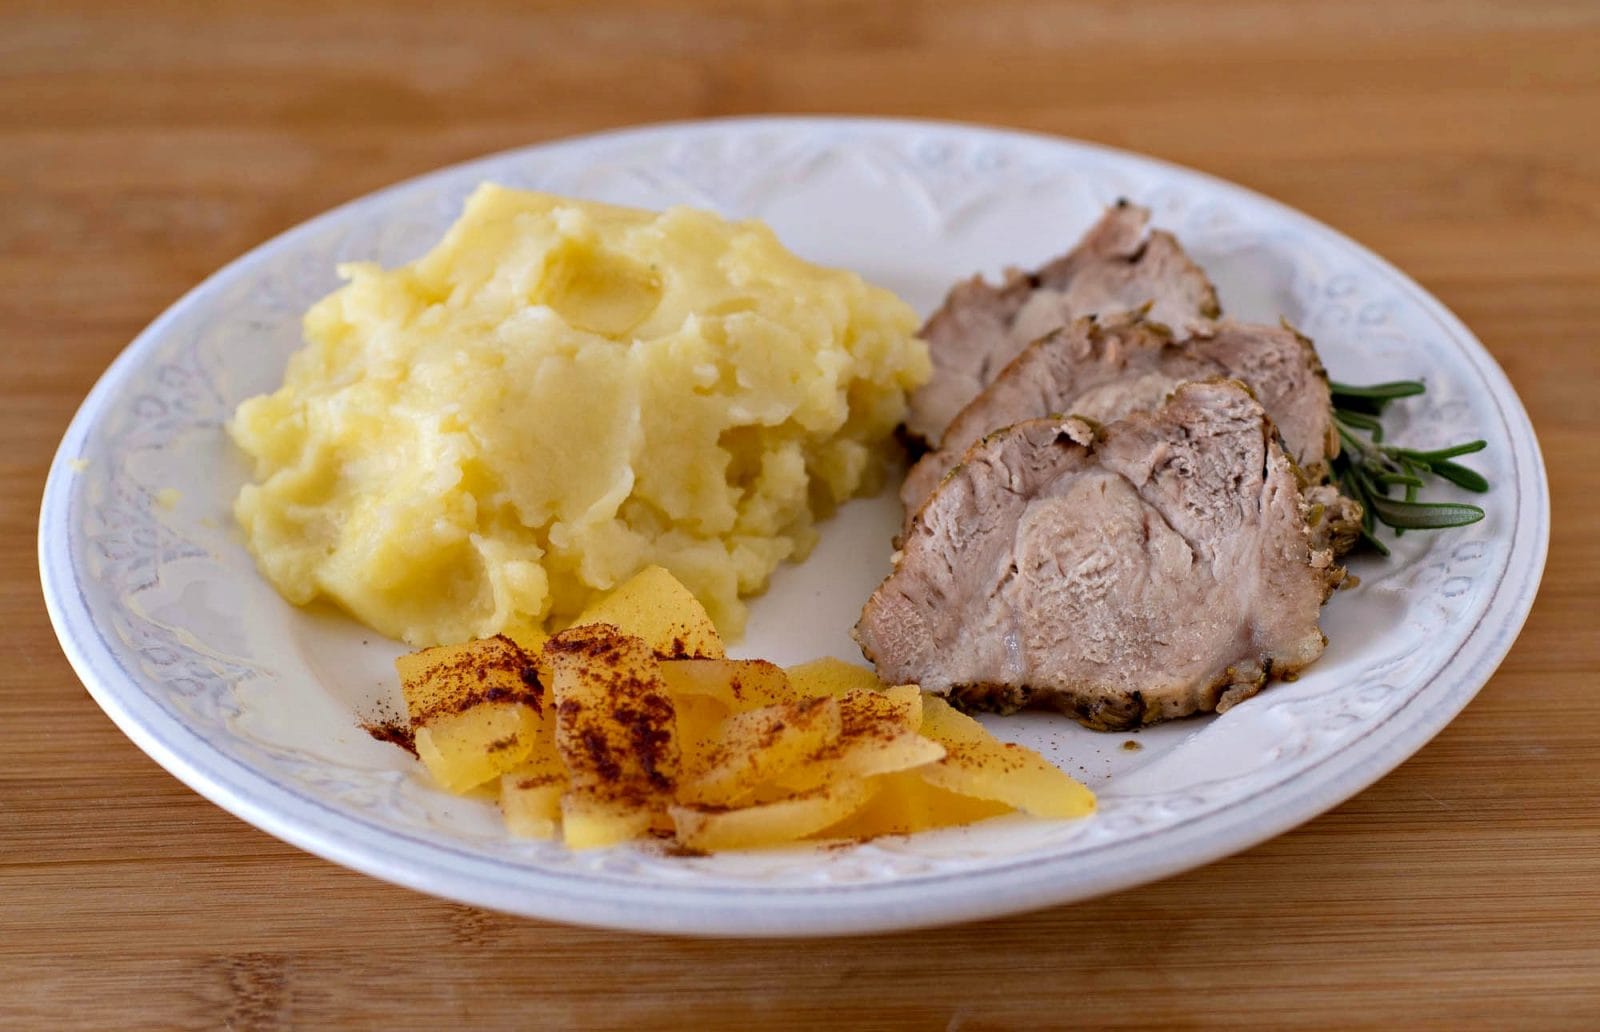 Plate with Instant Pot Pork Loin Recipe with mashed potatoes and apples